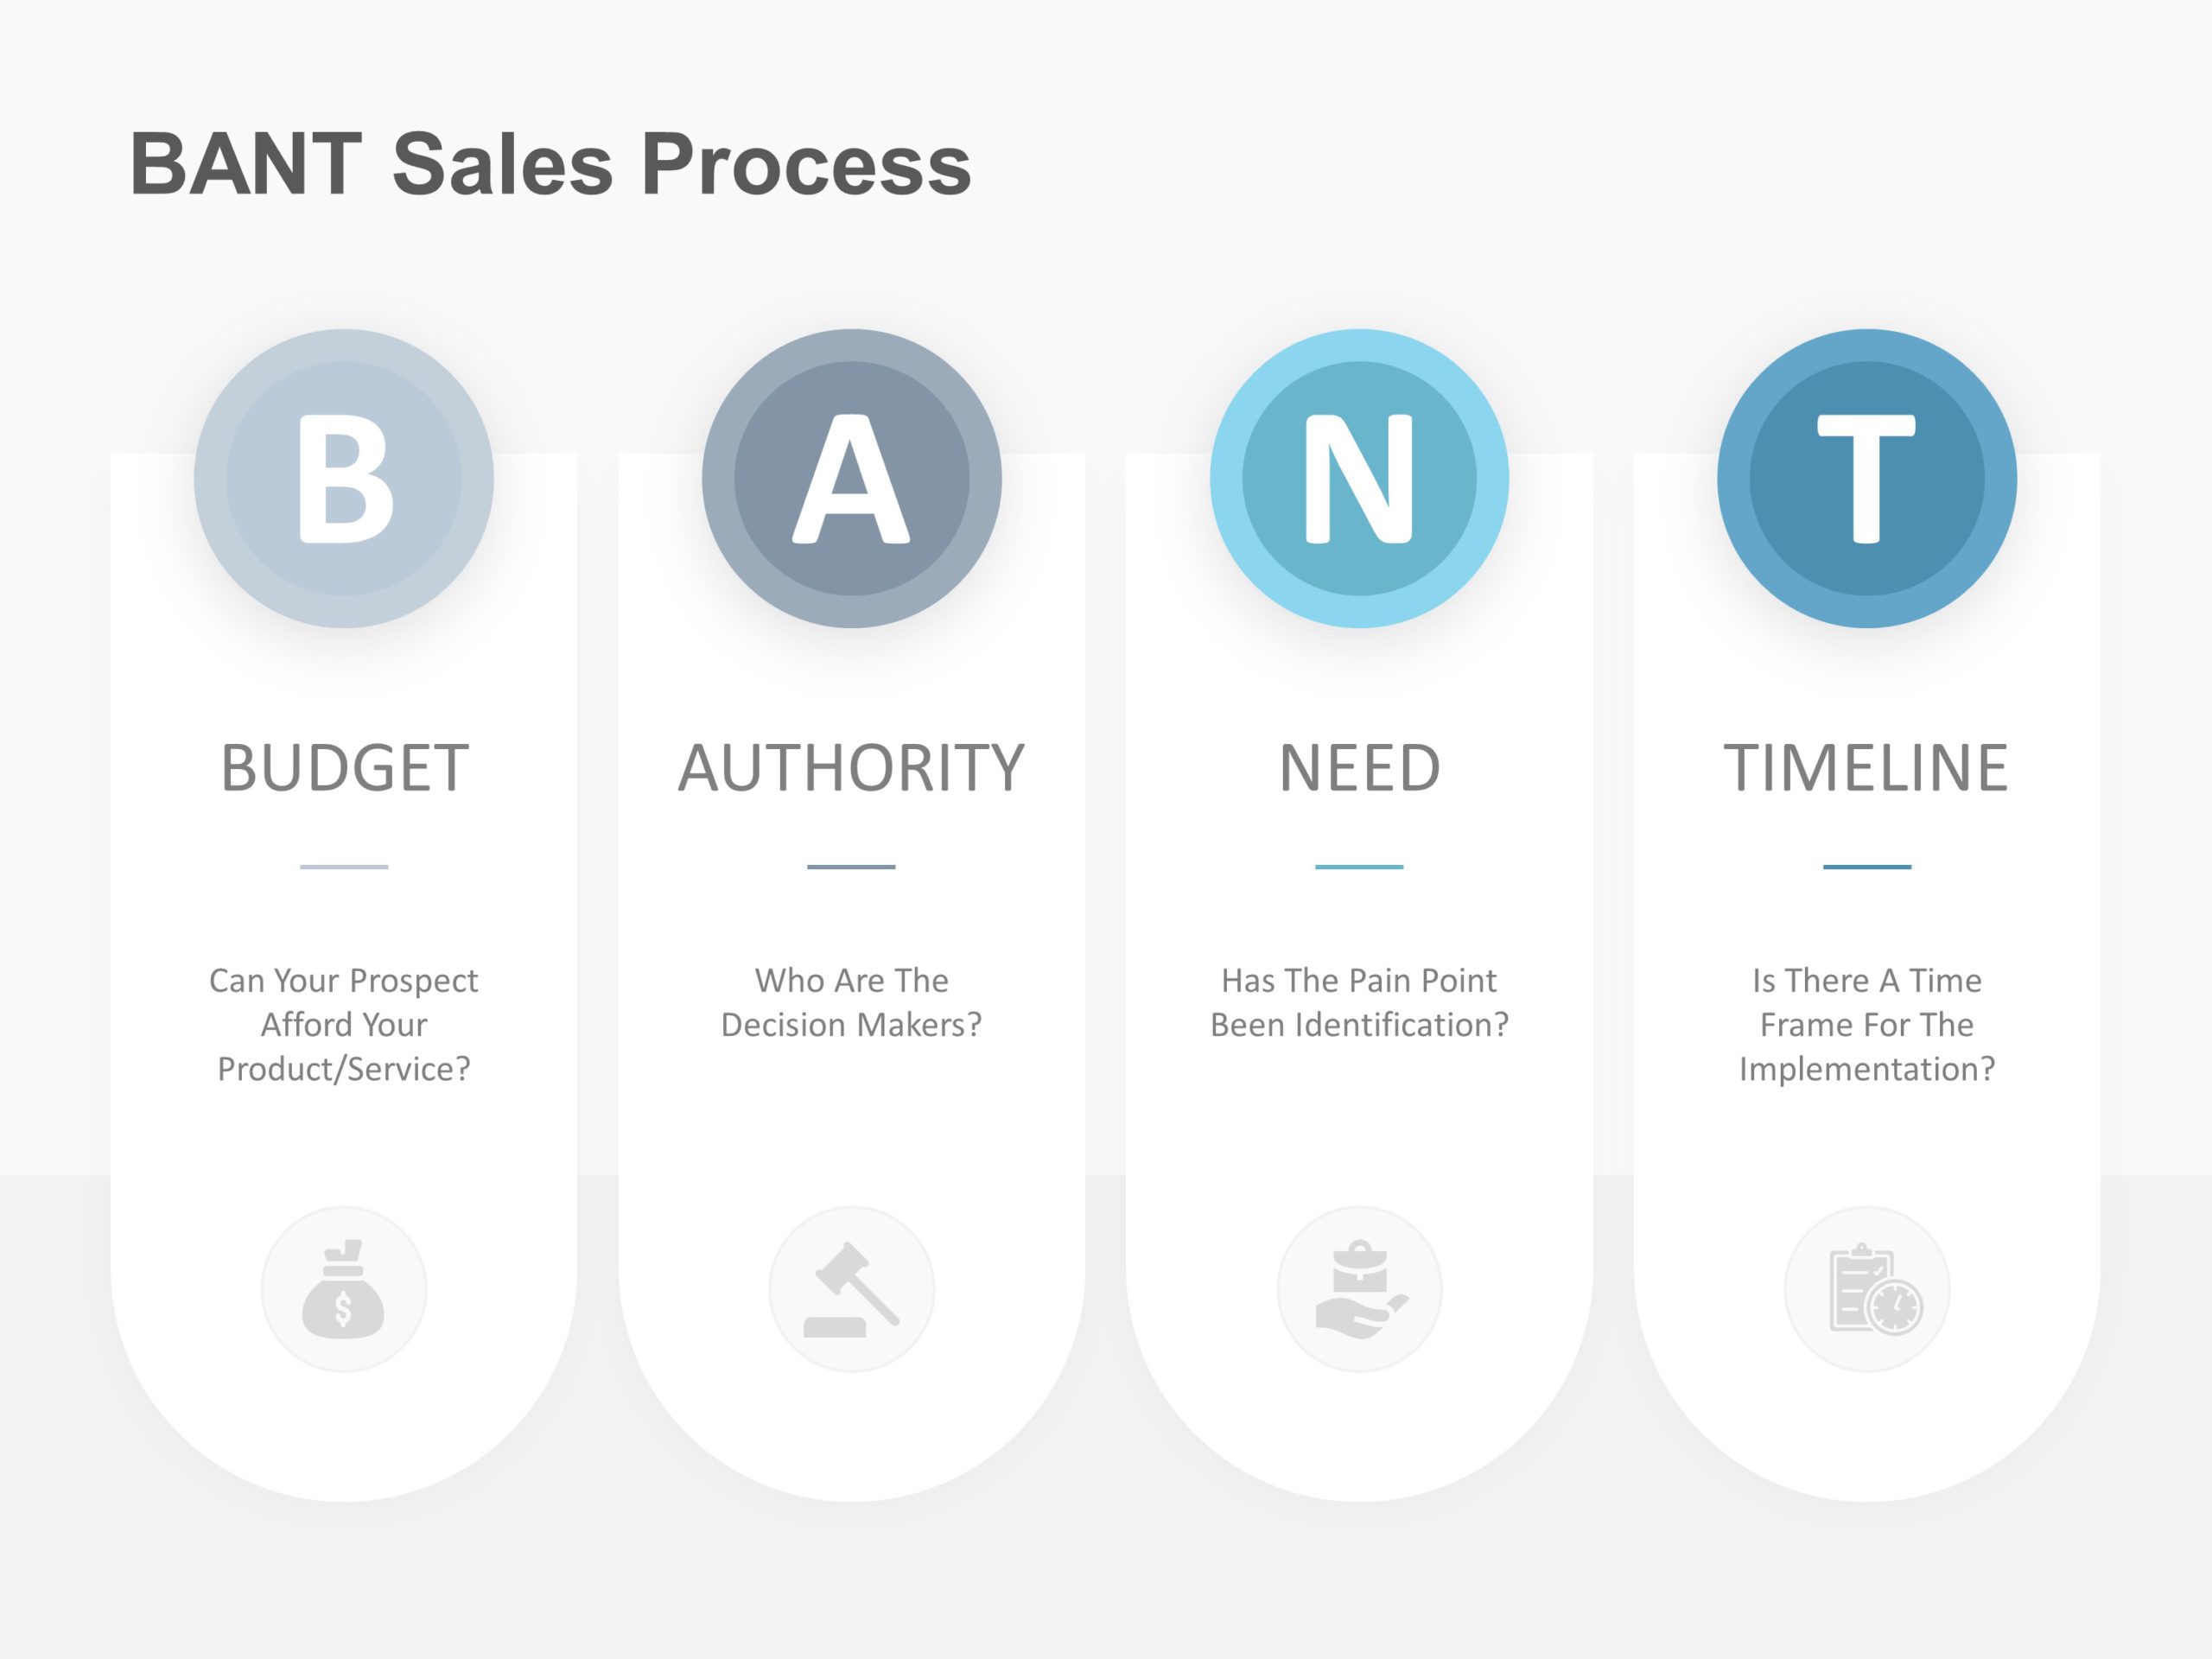 BANT Sales Process PowerPoint Template